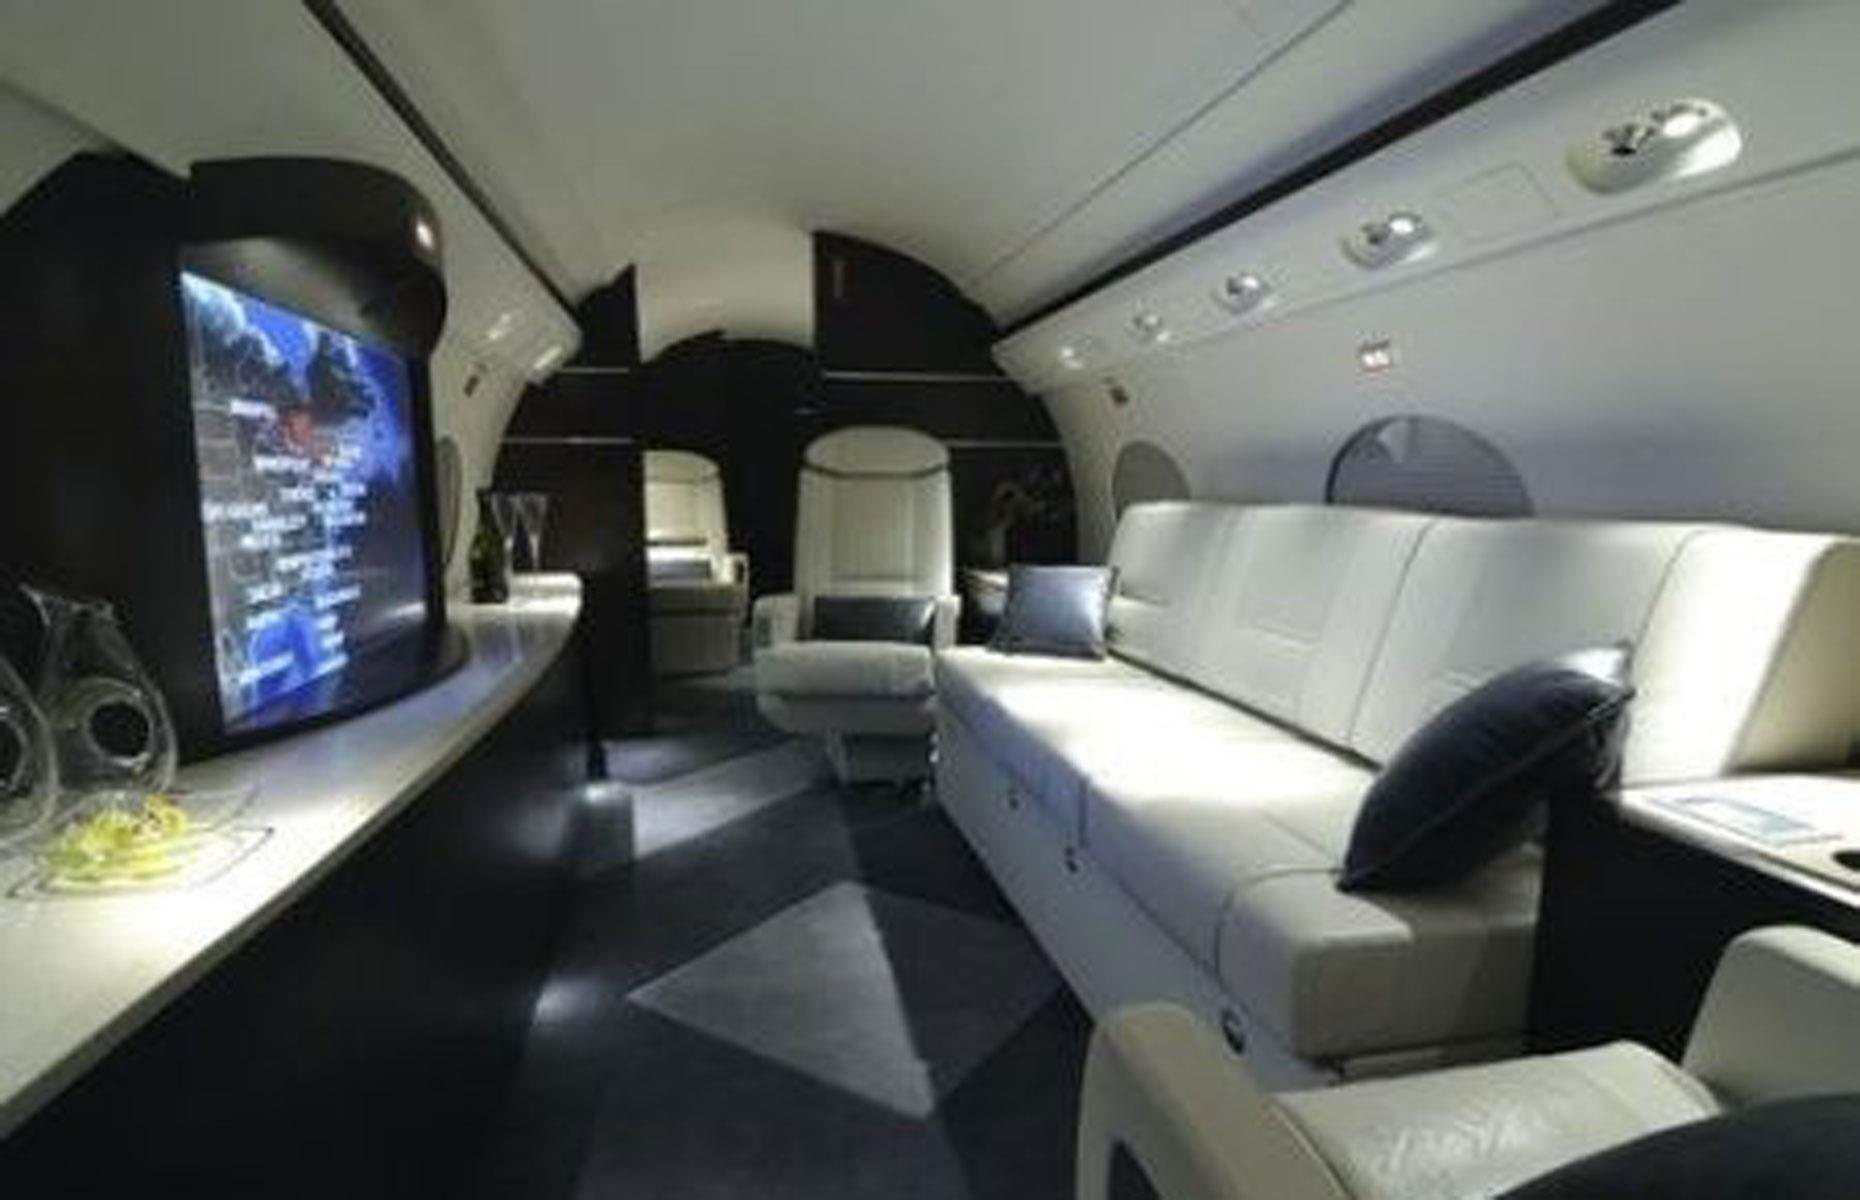 <p>The aircraft features an extra-large, high-definition LCD TV that offers movie theater-quality audio and visuals.</p>  <p>The plane even has controllable mood windows that change color and opacity to further enhance the viewing experience. </p>  <p>In addition to the futuristic entertainment area, the private jet has a formal dining and lounge area, an ultra-modern kitchen, smart bathrooms, and a private bedroom.</p>  <p>And that's not the only aircraft that Perry owns. His collection includes a seaplane, which he used to deliver food to the Bahamas in September 2019 after the nation was devastated by Hurricane Dorian.</p>